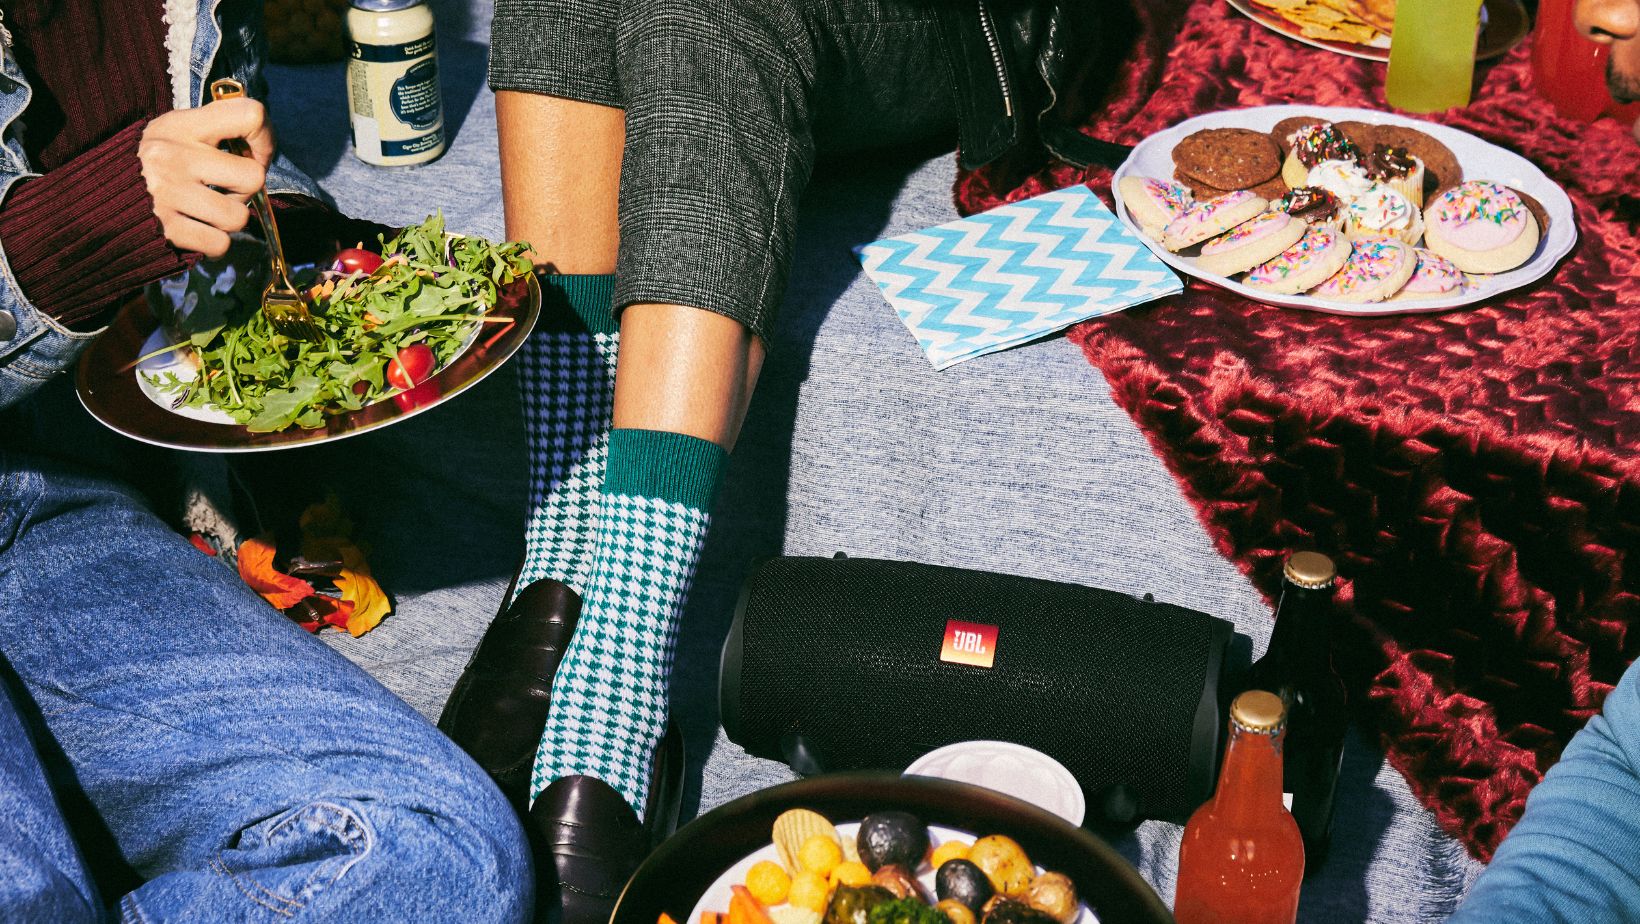 jbl speaker on picnic blanket with food and drinks